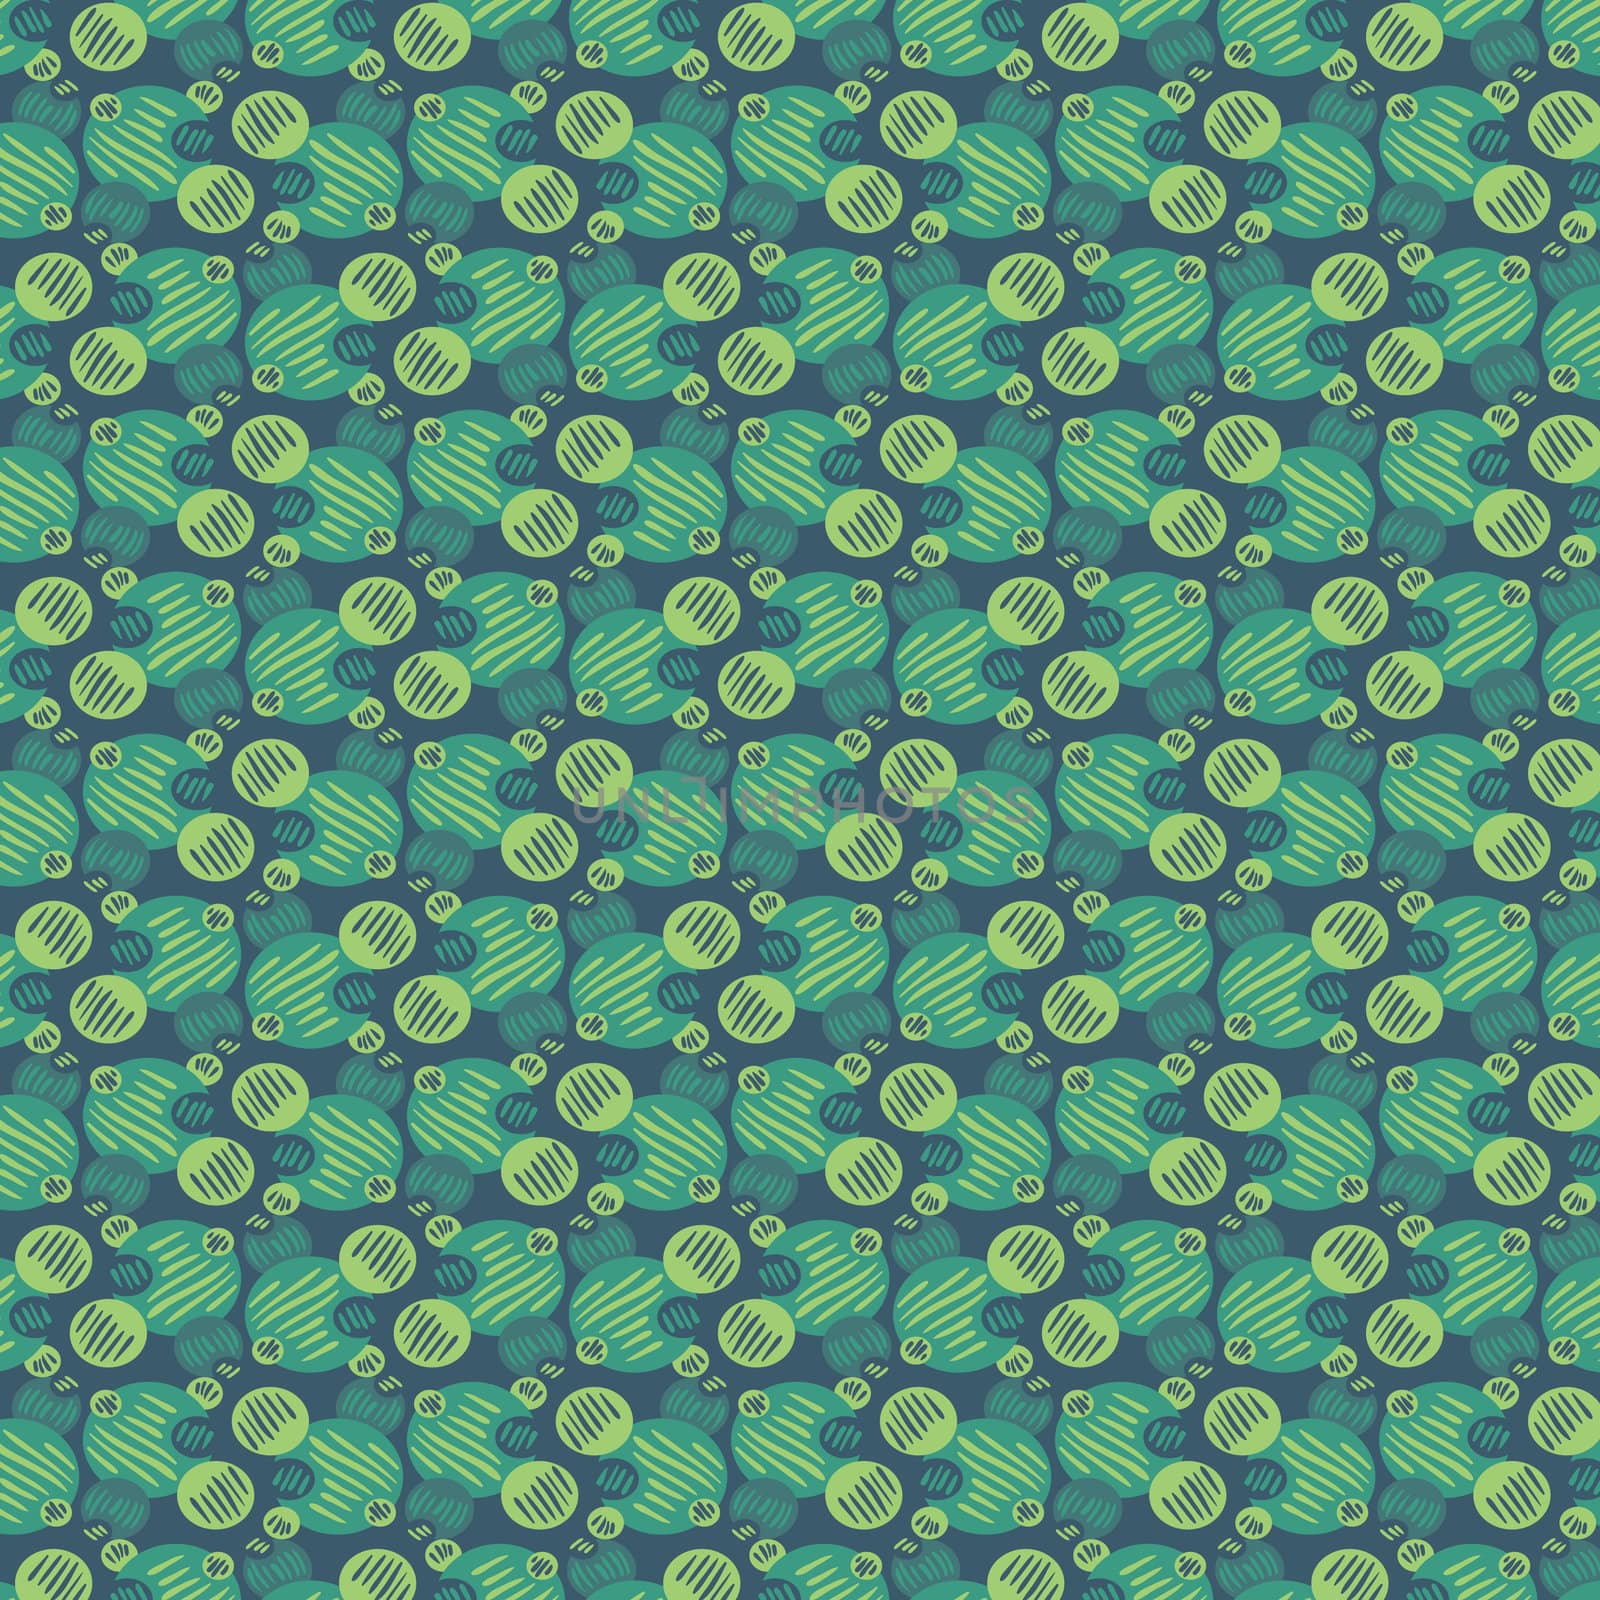 Green Circle and Line Pattern by mary981